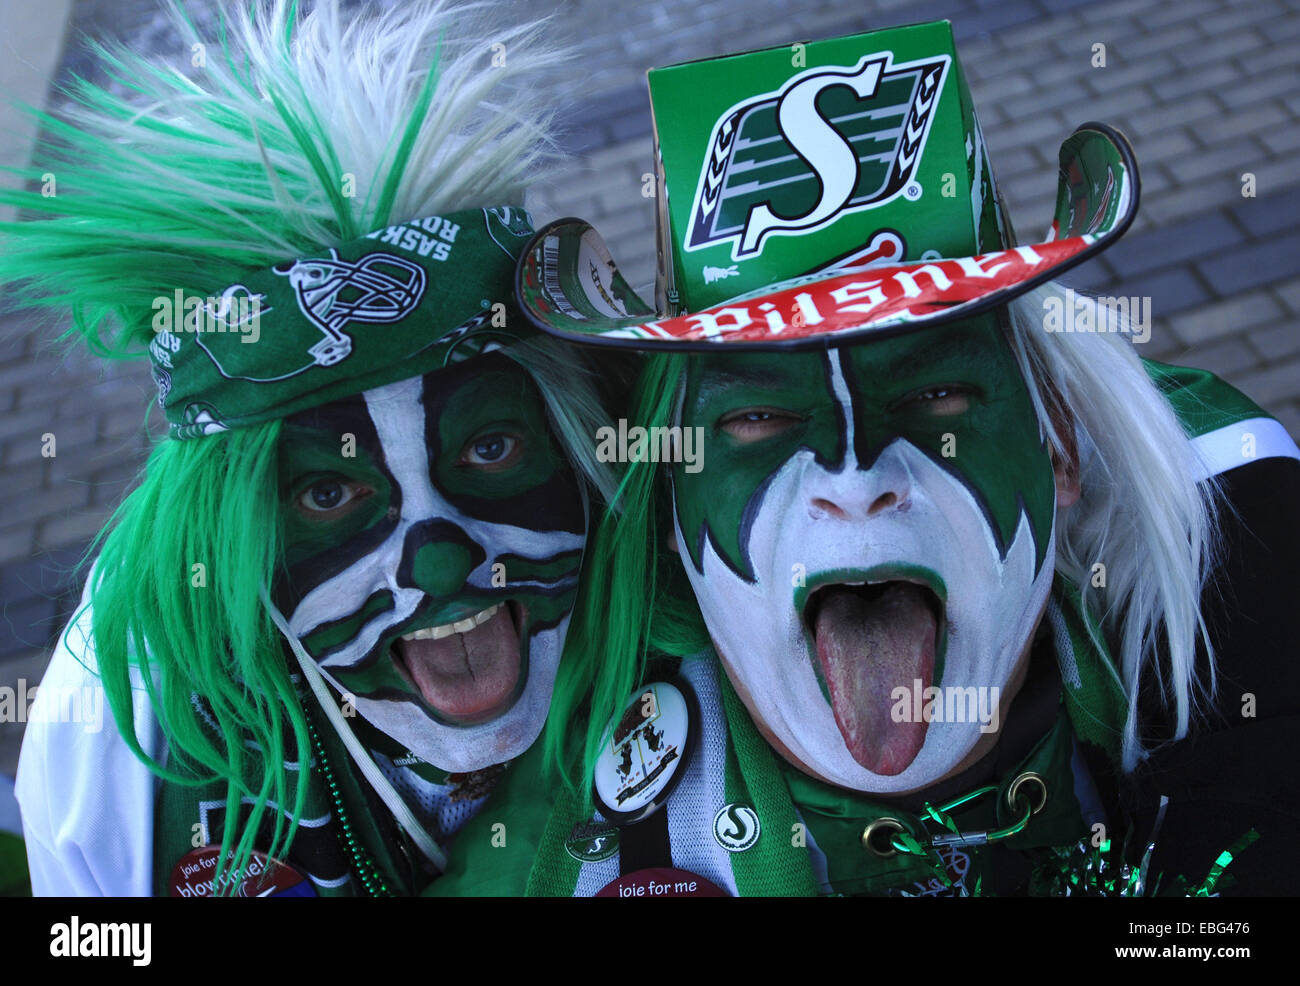 Vancouver, Canada. 30th Nov, 2014. Football fans pose during CFL's 102nd Grey Cup finals in Vancouver, Canada, Nov. 30, 2014. Calgary Stampeders defeated Hamilton Tiger-Cats and captured 102nd Grey Cup. © Sergei Bachlakov/Xinhua/Alamy Live News Stock Photo